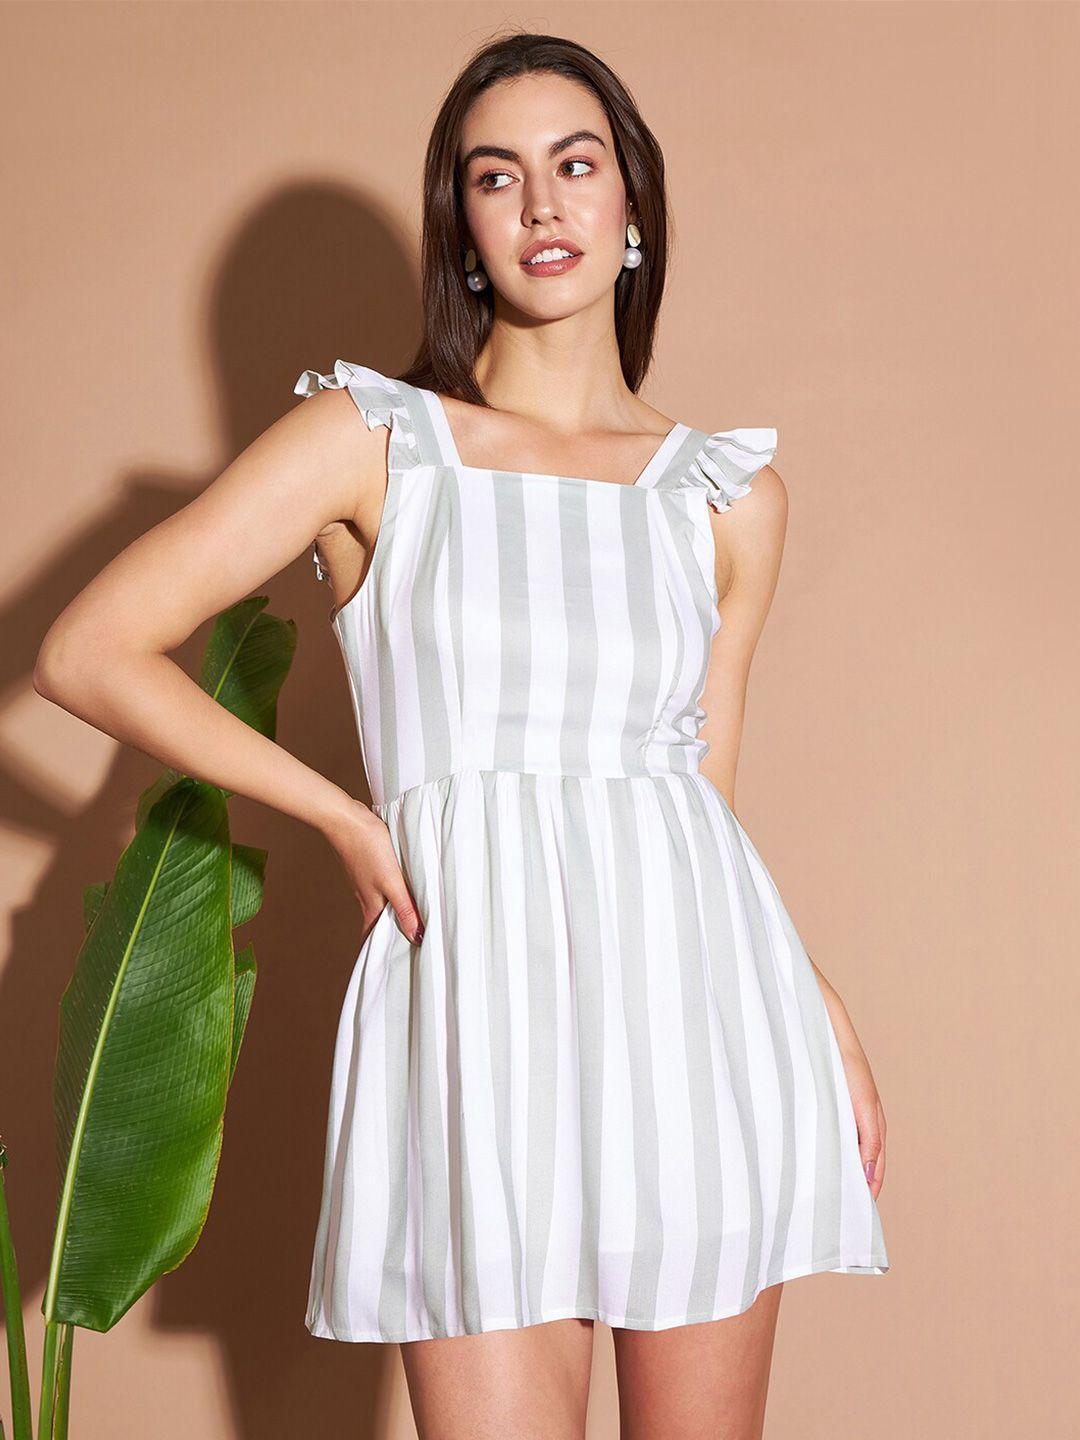 marie claire white striped fit & flare dress